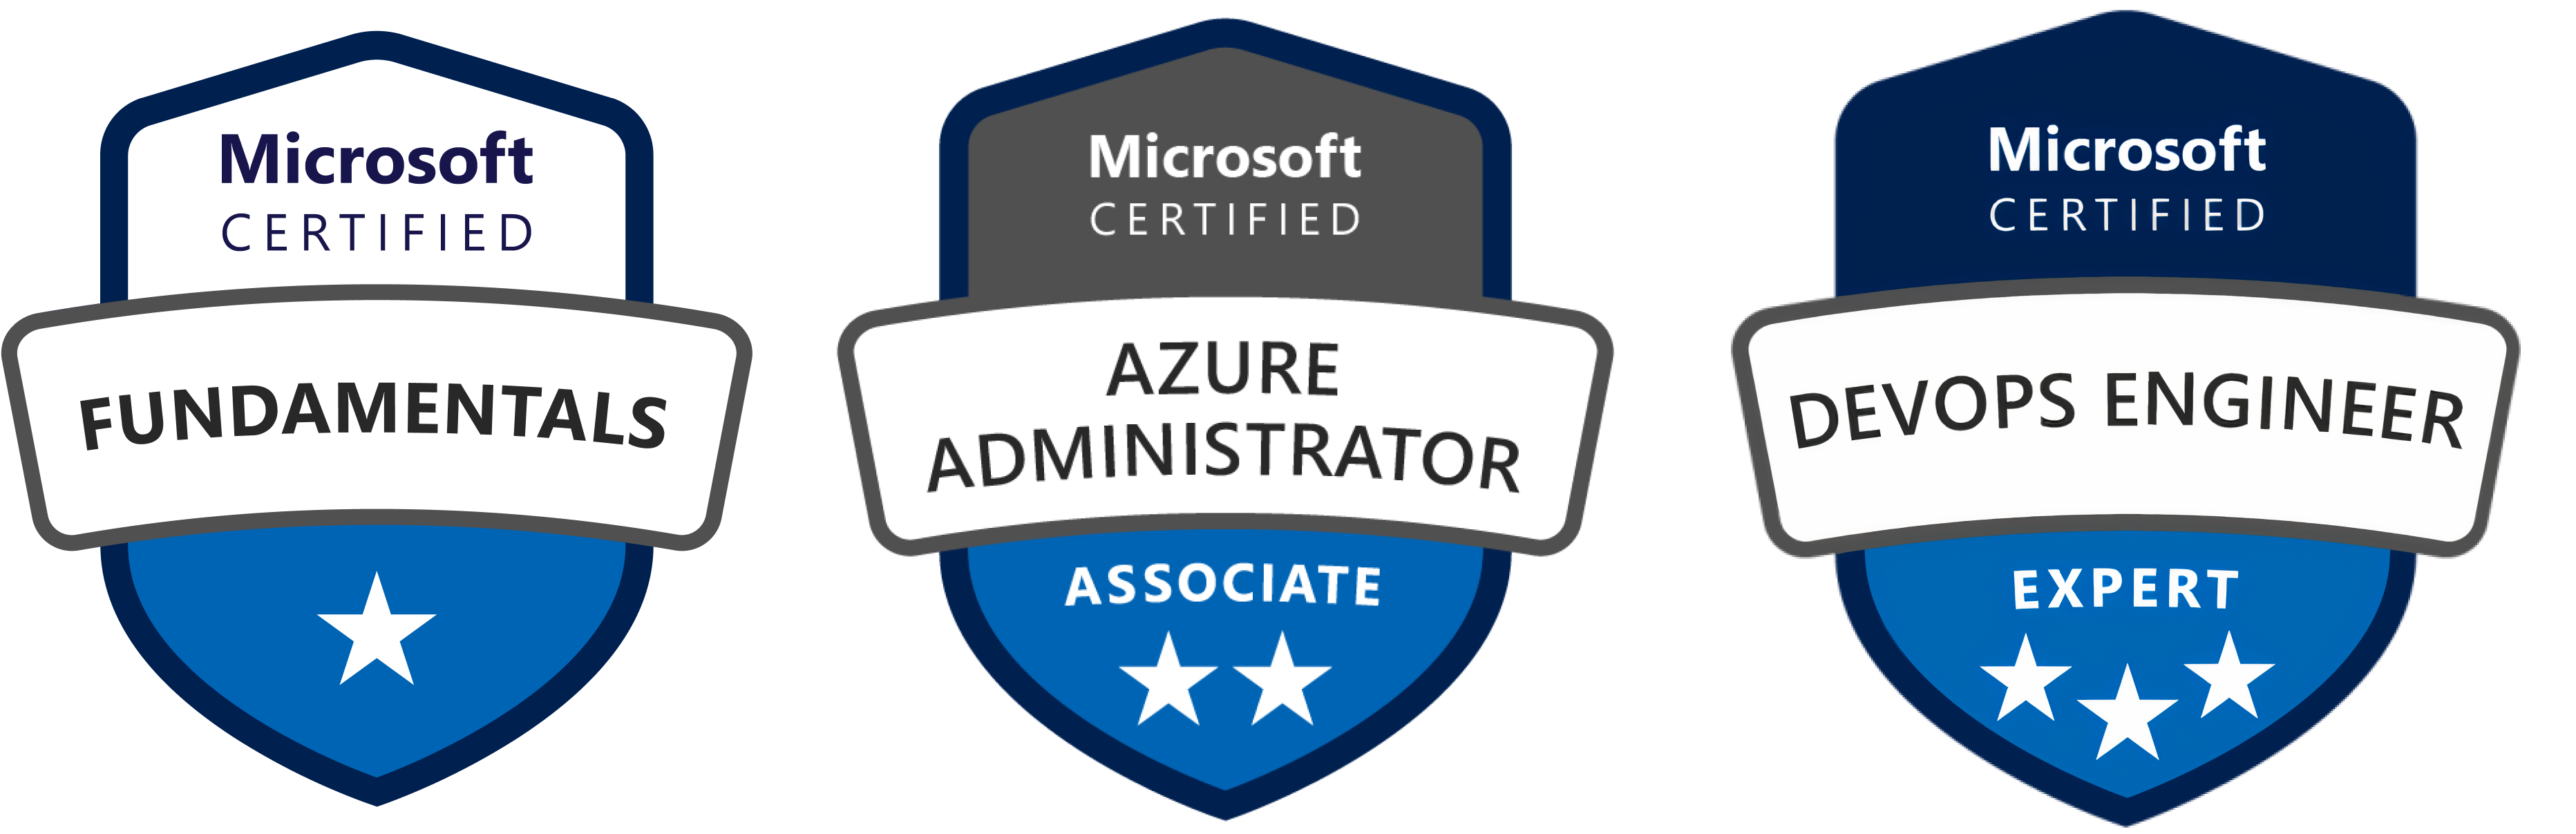 Our Azure cloud engineers are consistently involved in official Azure training and events, and they hold up-to-date certifications, demonstrating our passions for knowledge and desire to stay current with Azure new technology and practices.